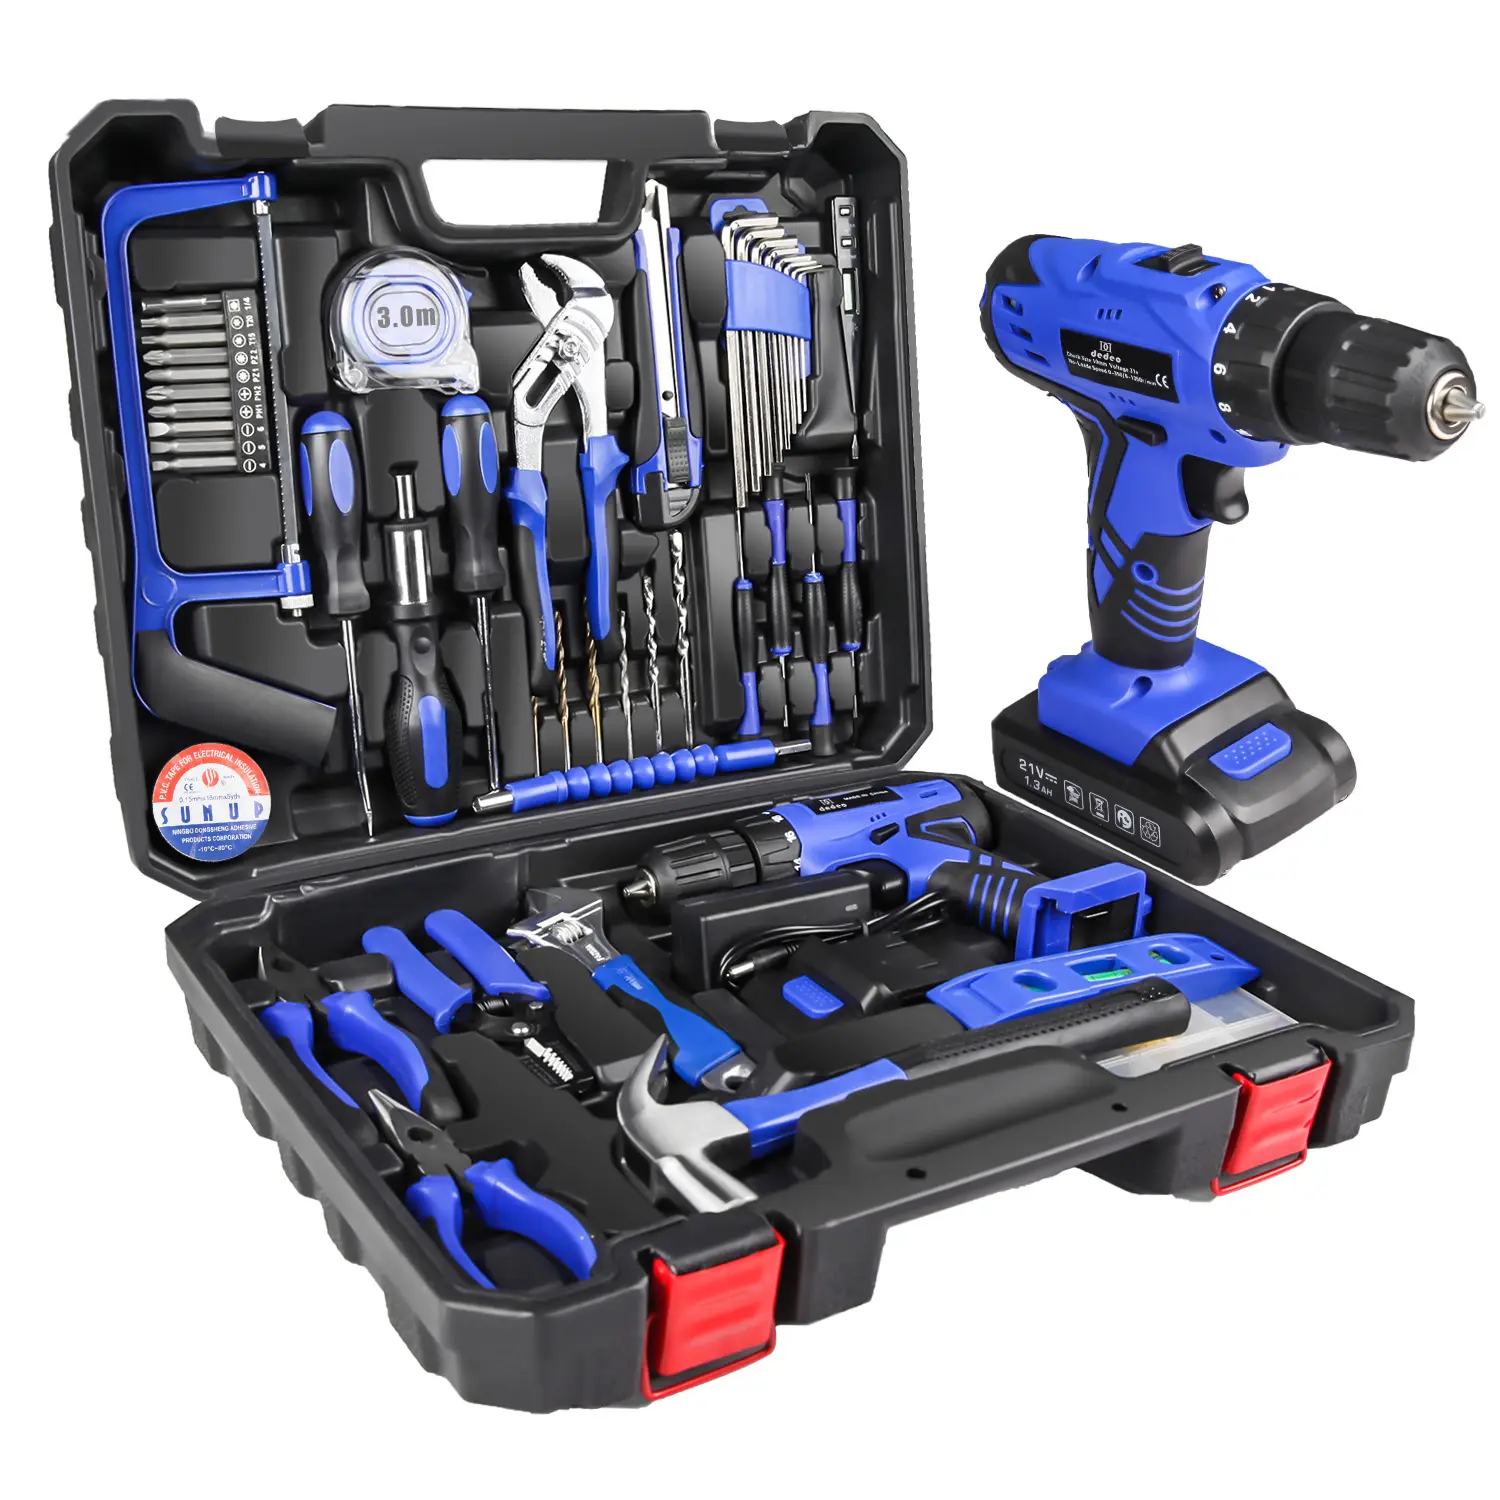 104pcs Li-ion Battery Driver Drills Screwdriver Hand Bicycle Repair Vehicle Tools for Car Electric Cordless Drill Power Tool Set